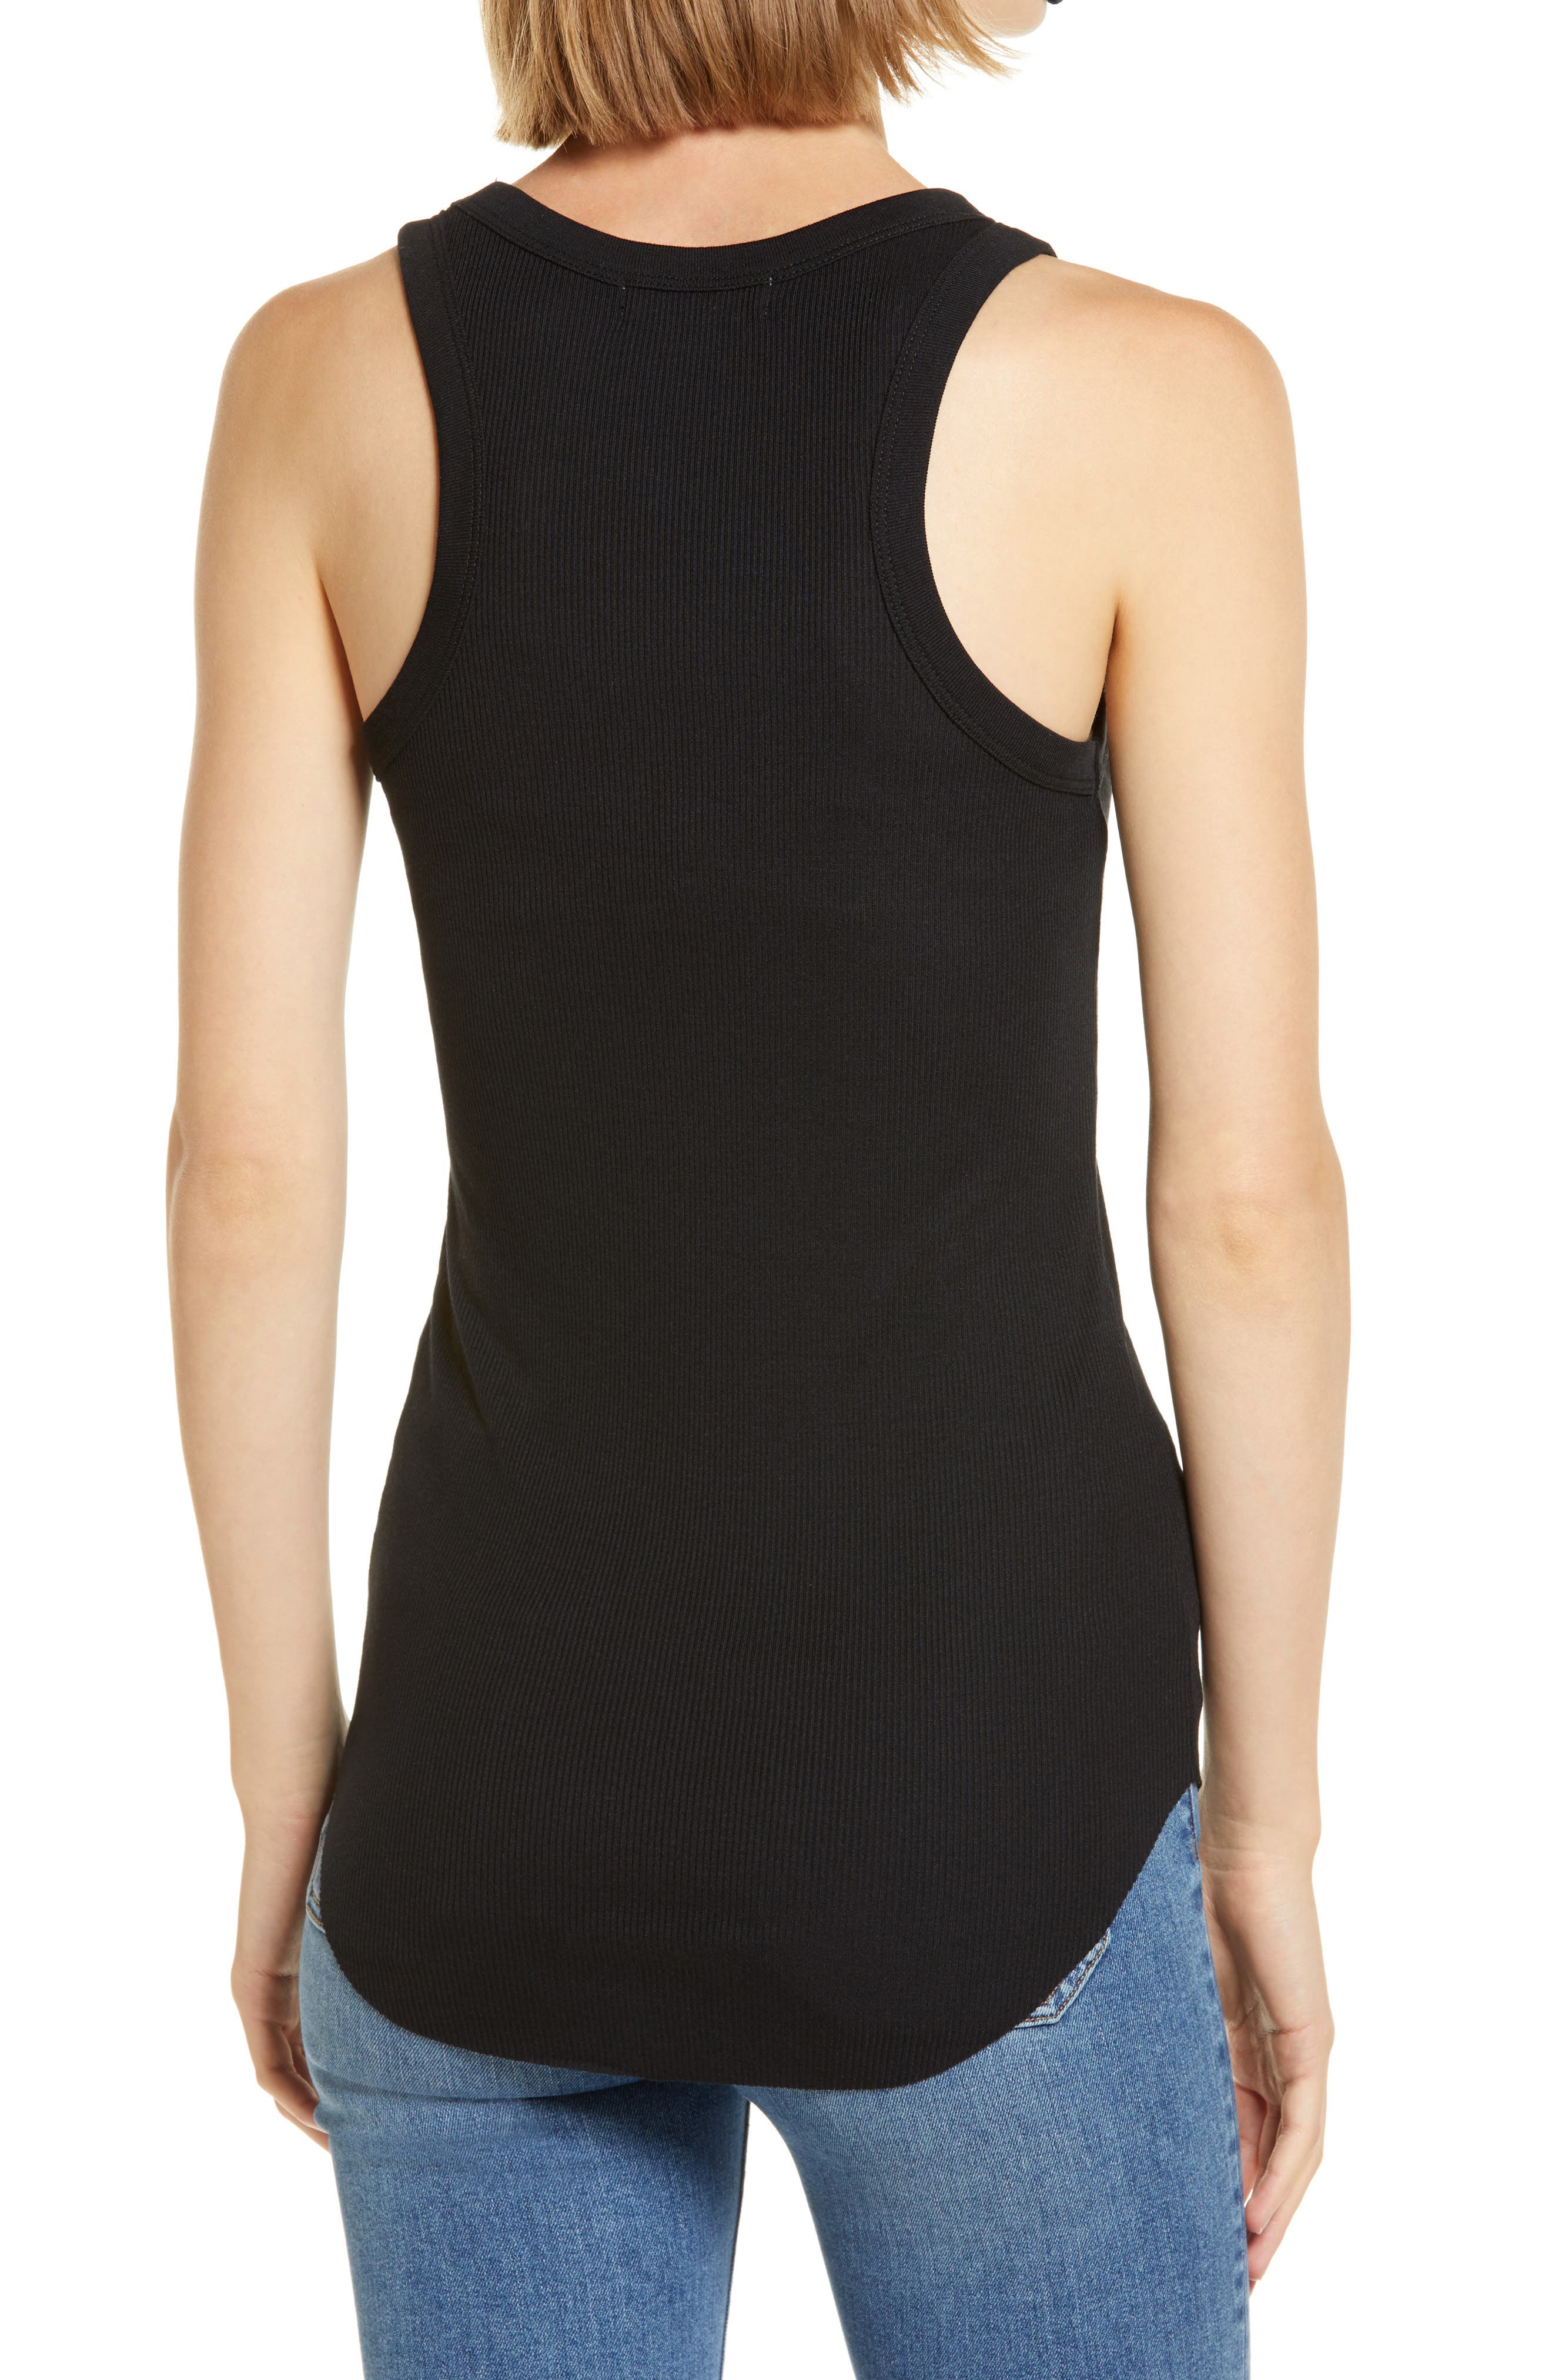 M Many Colors L S New Women's Ribbed Basic Tank Top with Racerback 